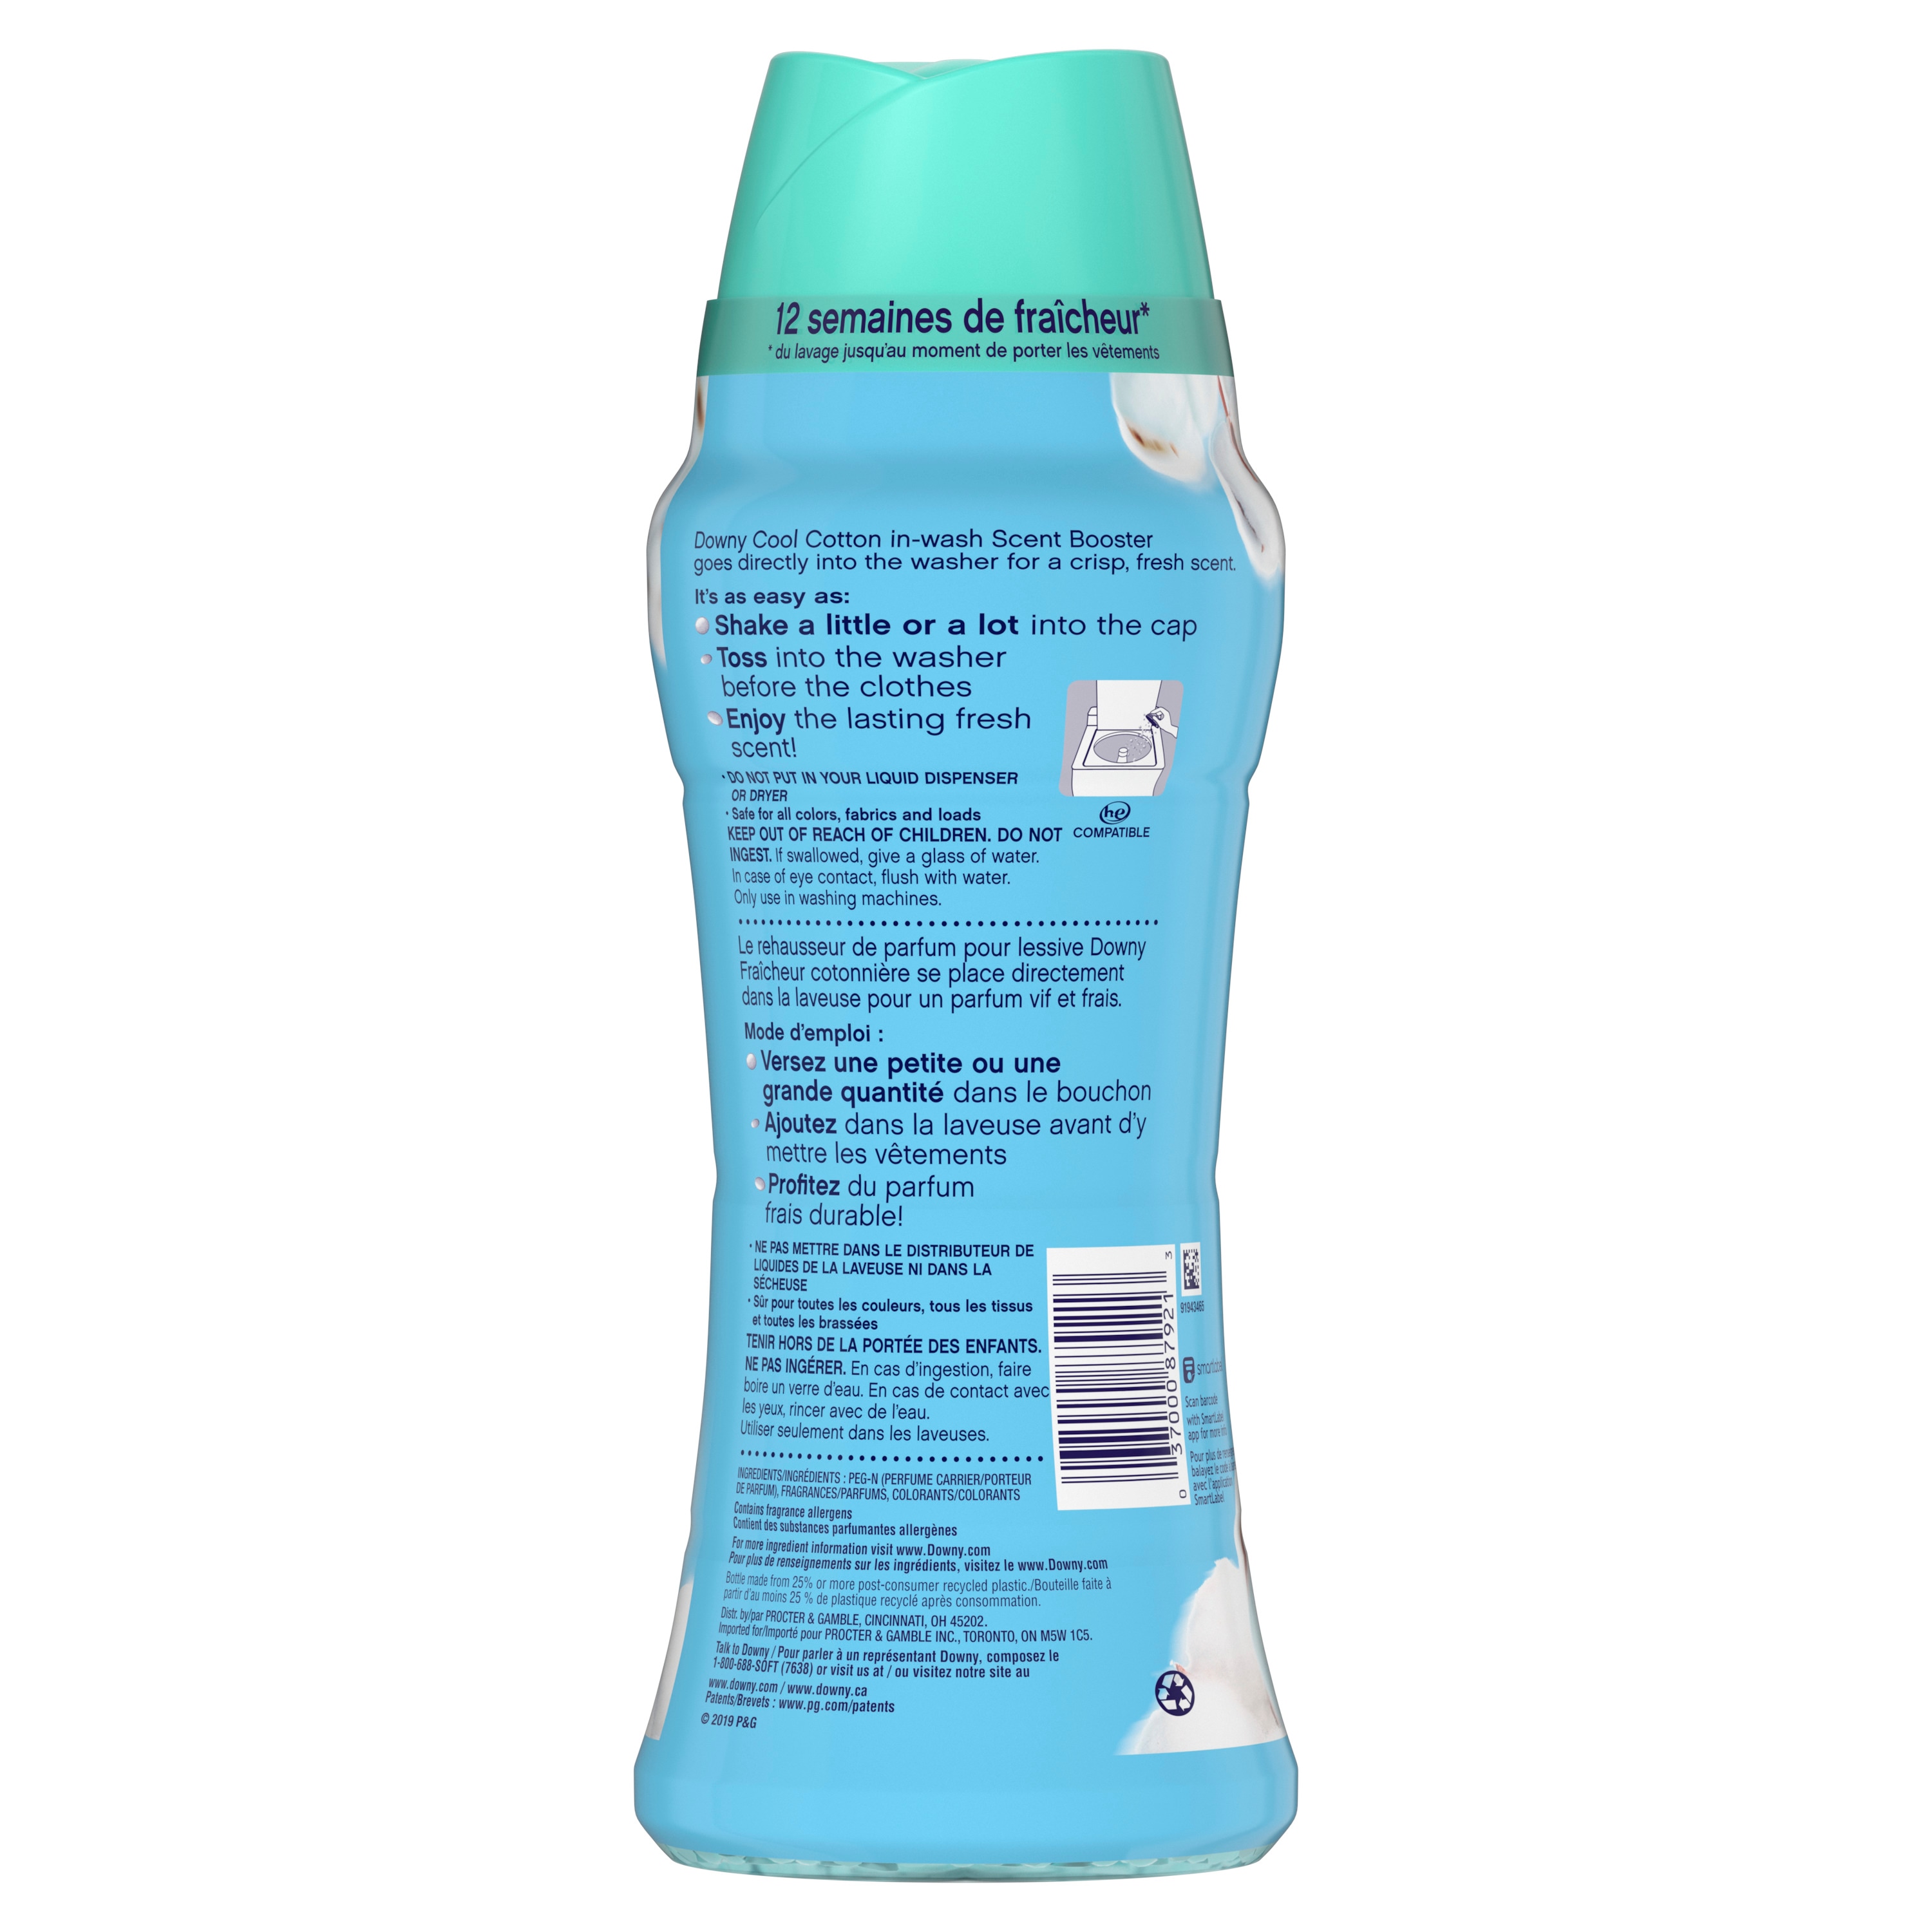 Downy Cool Cotton In-Wash Scent Booster 963 g / 34 oz